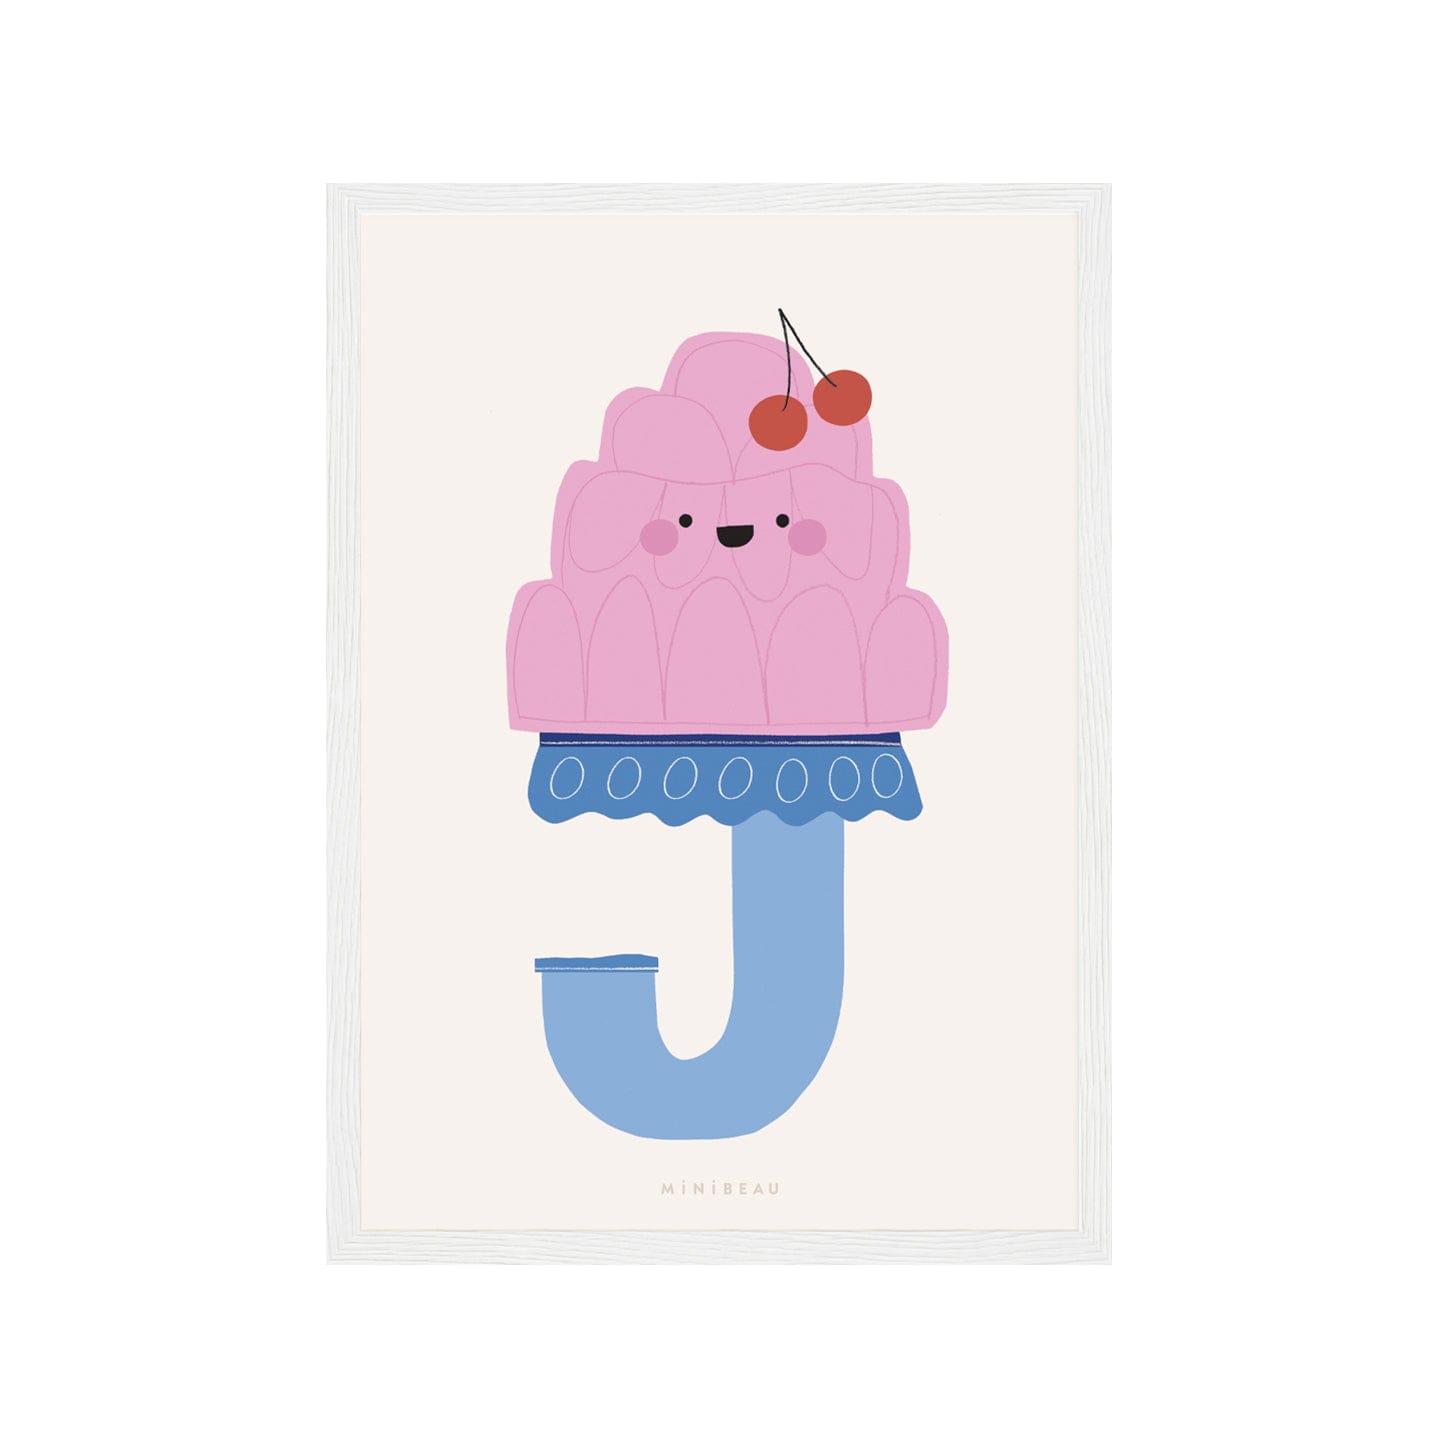 Art print in a white frame. Our Happy Alphabet 'J' Art Print shows a smiling pink moulded jelly on a blue stand in the shape of a J, with cherries on top of the Jelly on a neutral background.